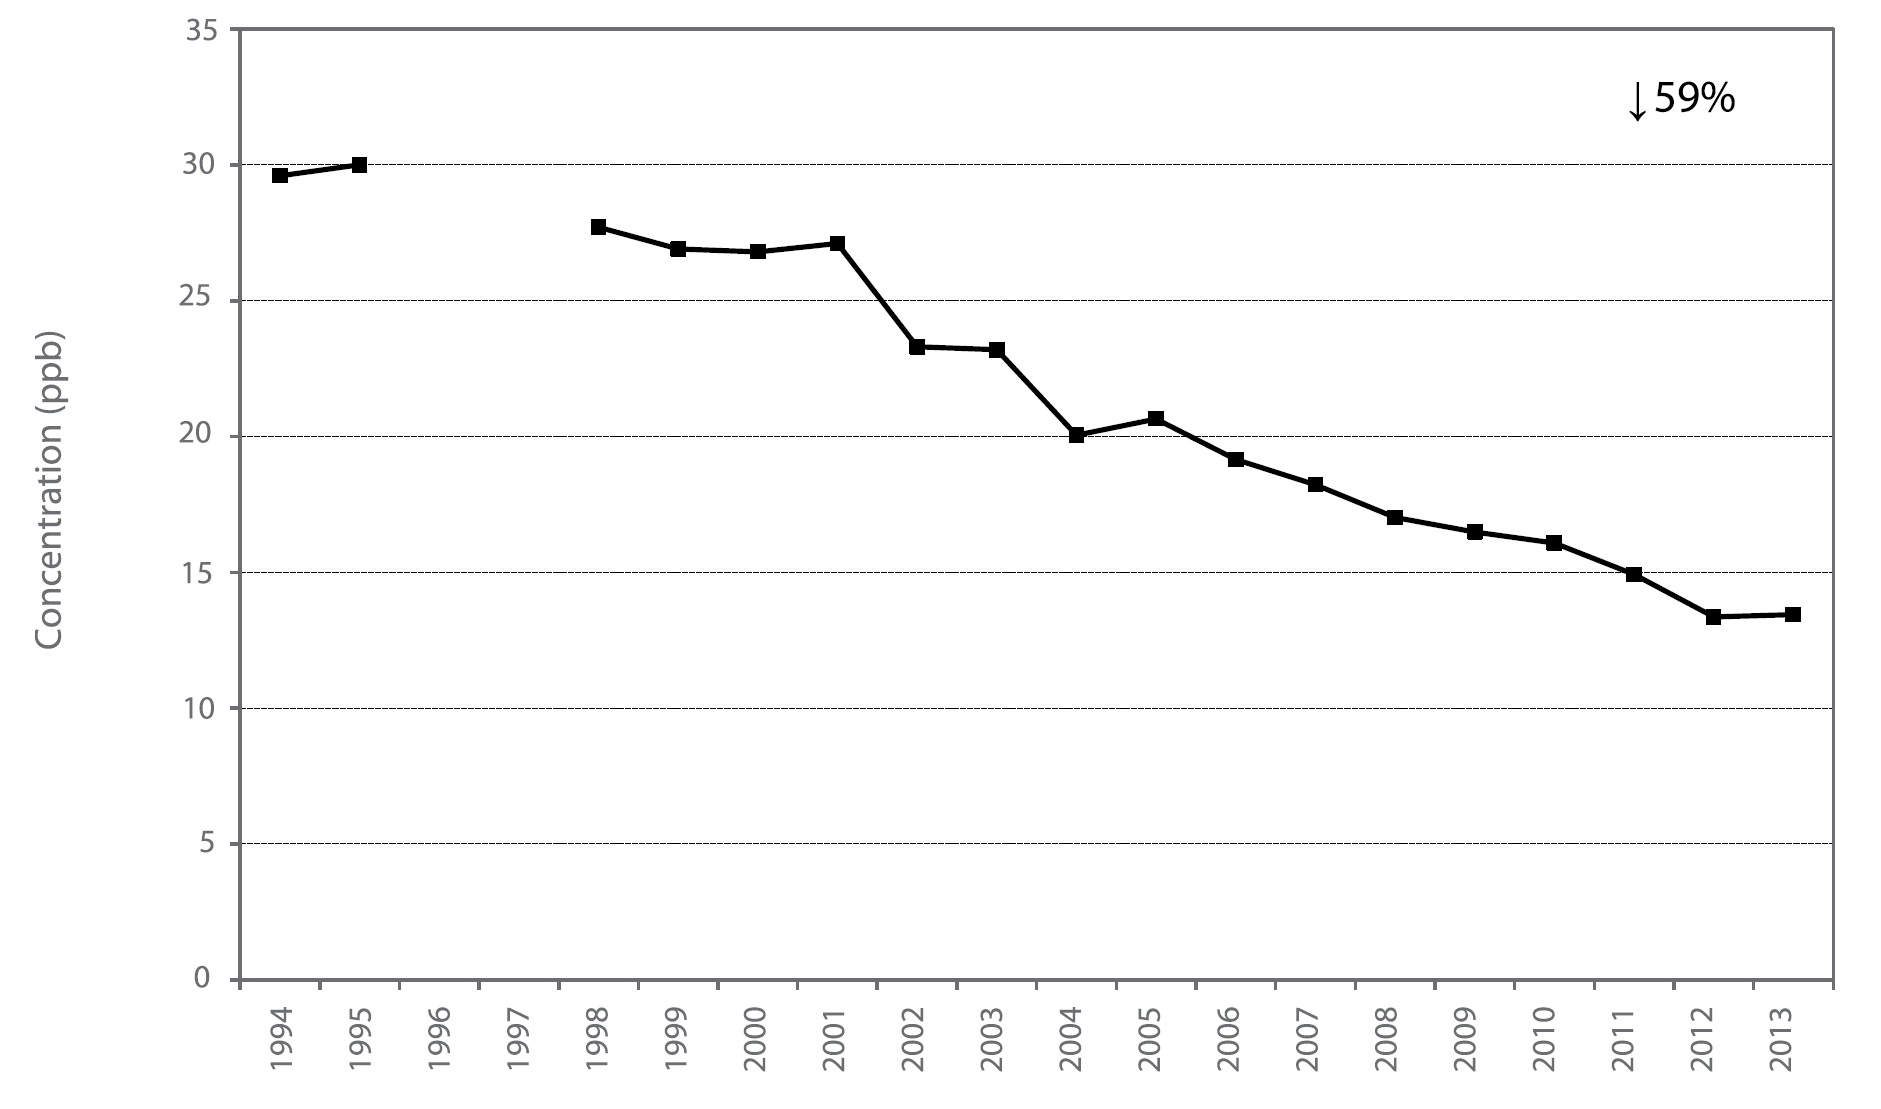 Figure A34 is a line chart displaying the nitrogen dioxide annual mean at Toronto Downtown from 1994 to 2013. Over this 20-year period, nitrogen dioxide decreased 59%.